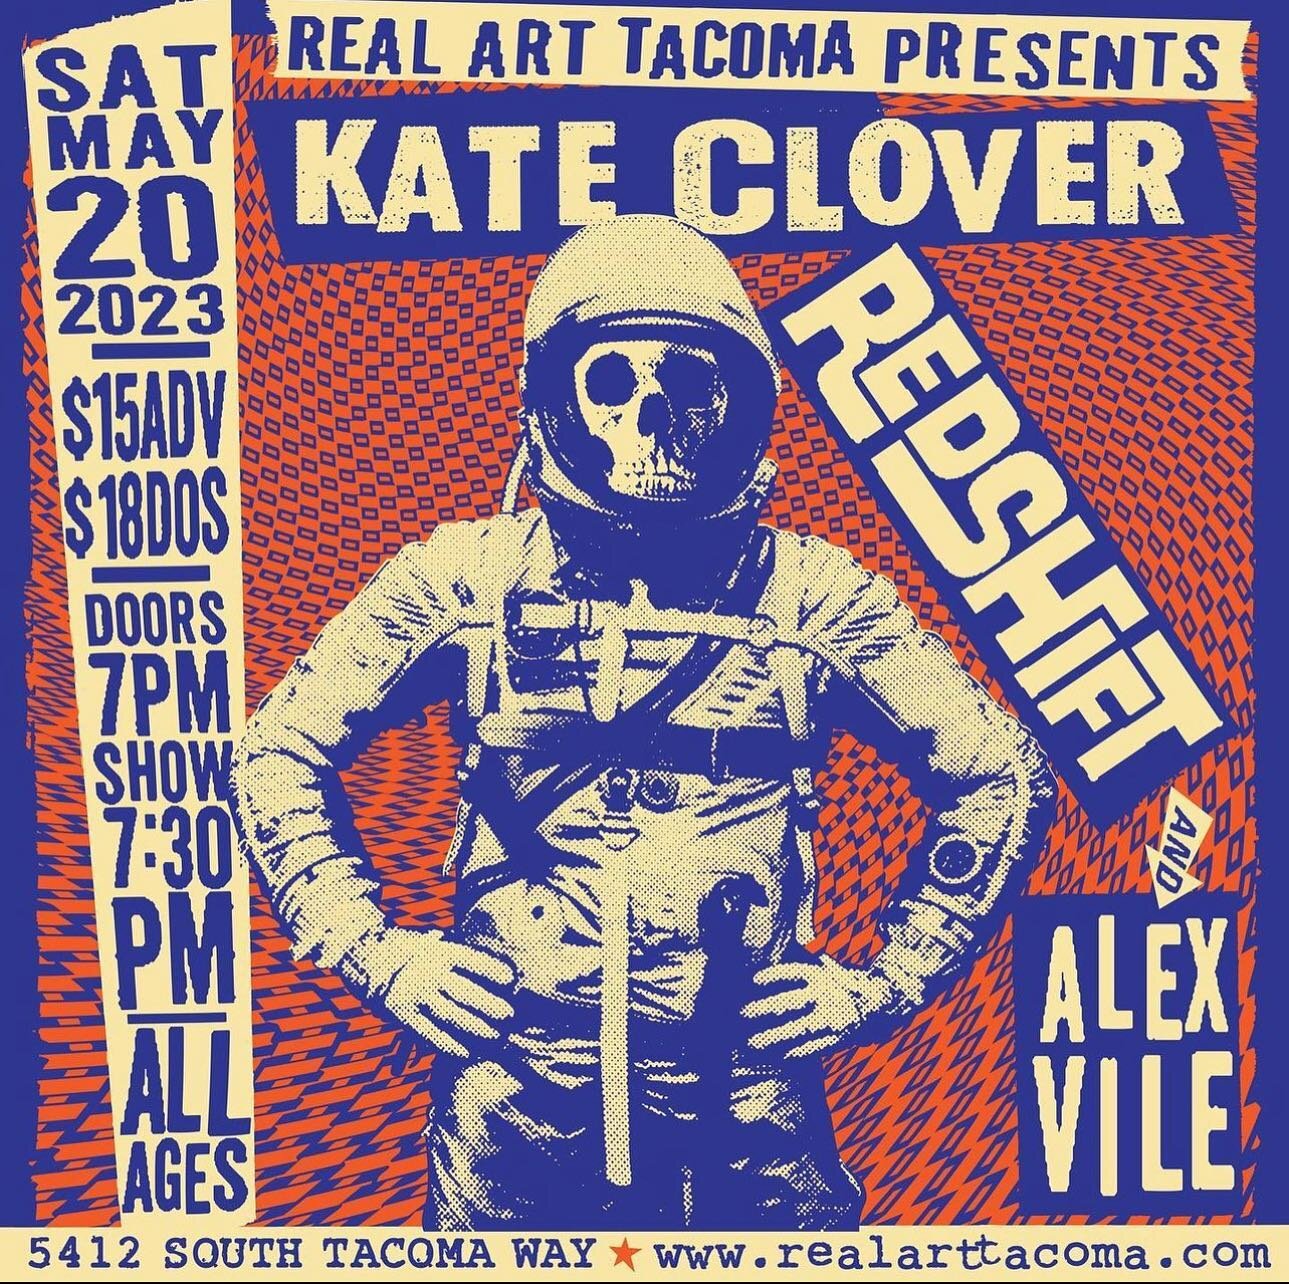 Saturday, May 20th 2023

Real Art Tacoma Presents:

KATE CLOVER
w/ Guests RedShift
&amp; Alex Vile

$15 ADV // $18 DOS
7:00pm Doors // 7:30pm Show
ALL AGES